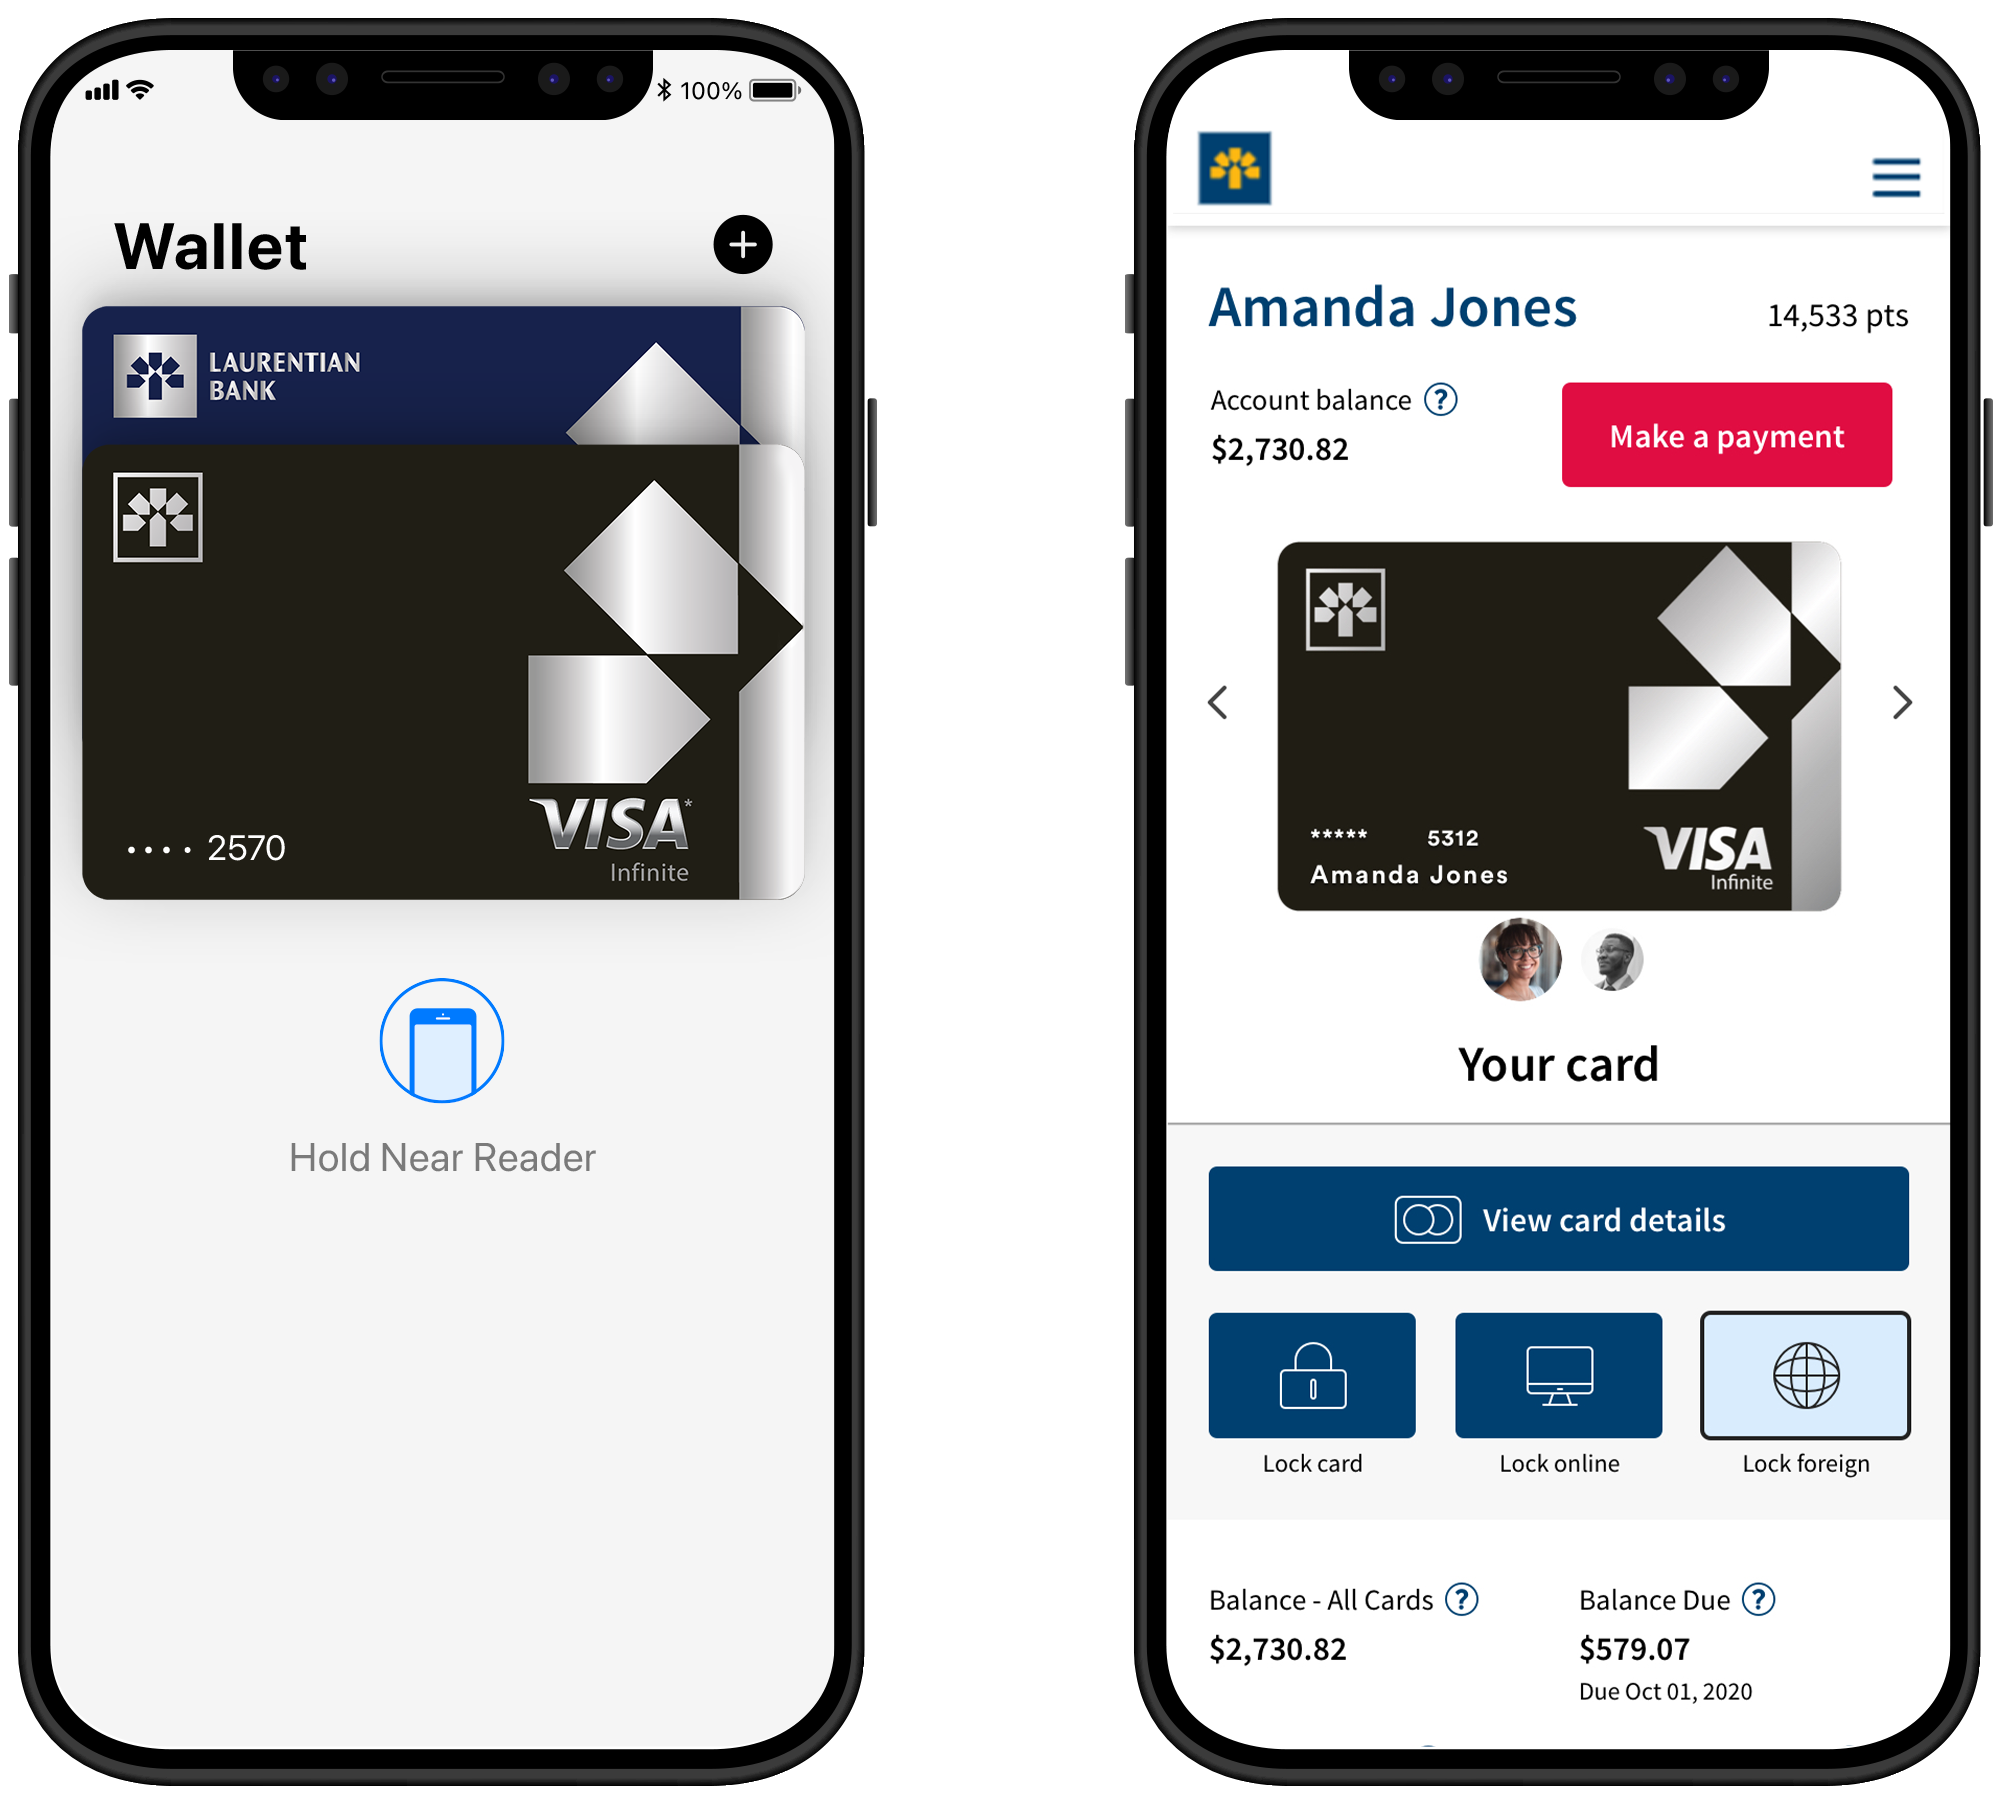 Overview of a mobile wallet